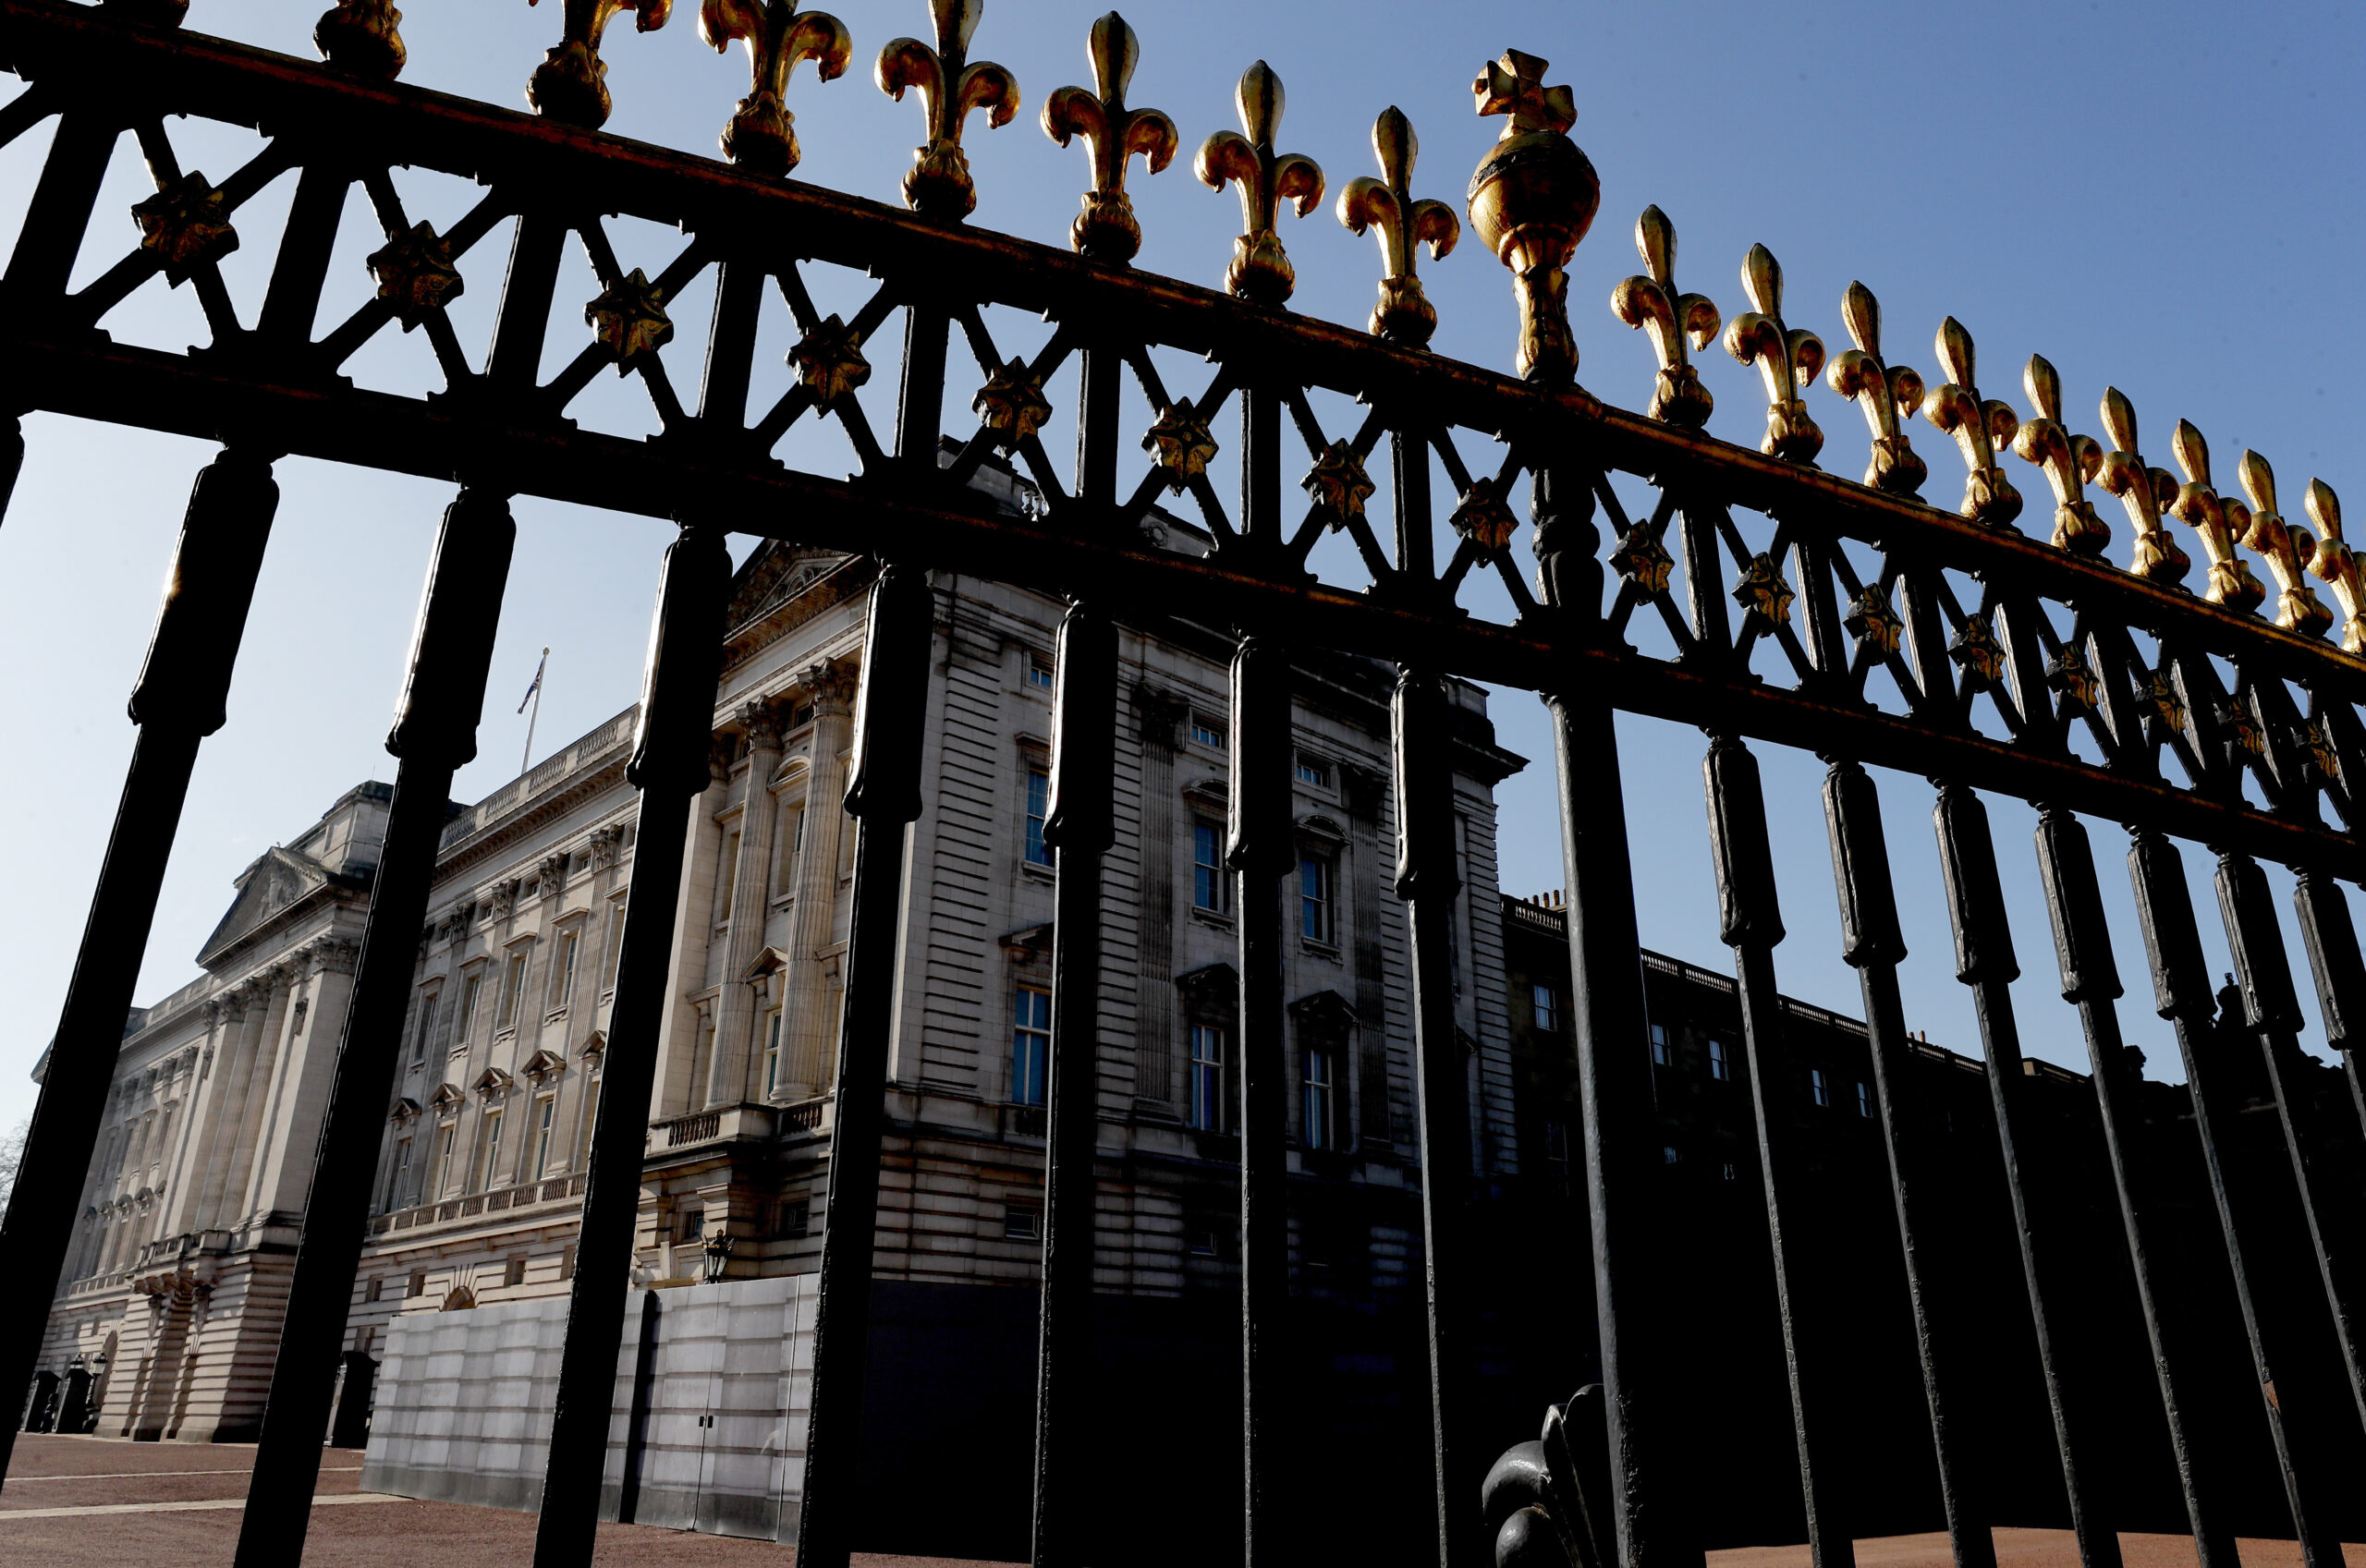 A view of Buckingham Palace, in London, Tuesday, March 9, 2021. Britain's royal family is absorbing the tremors from a sensational television interview by Prince Harry and the Duchess of Sussex, in which the couple said they encountered racist attitudes and a lack of support that drove Meghan to thoughts of suicide. (AP Photo/Frank Augstein)